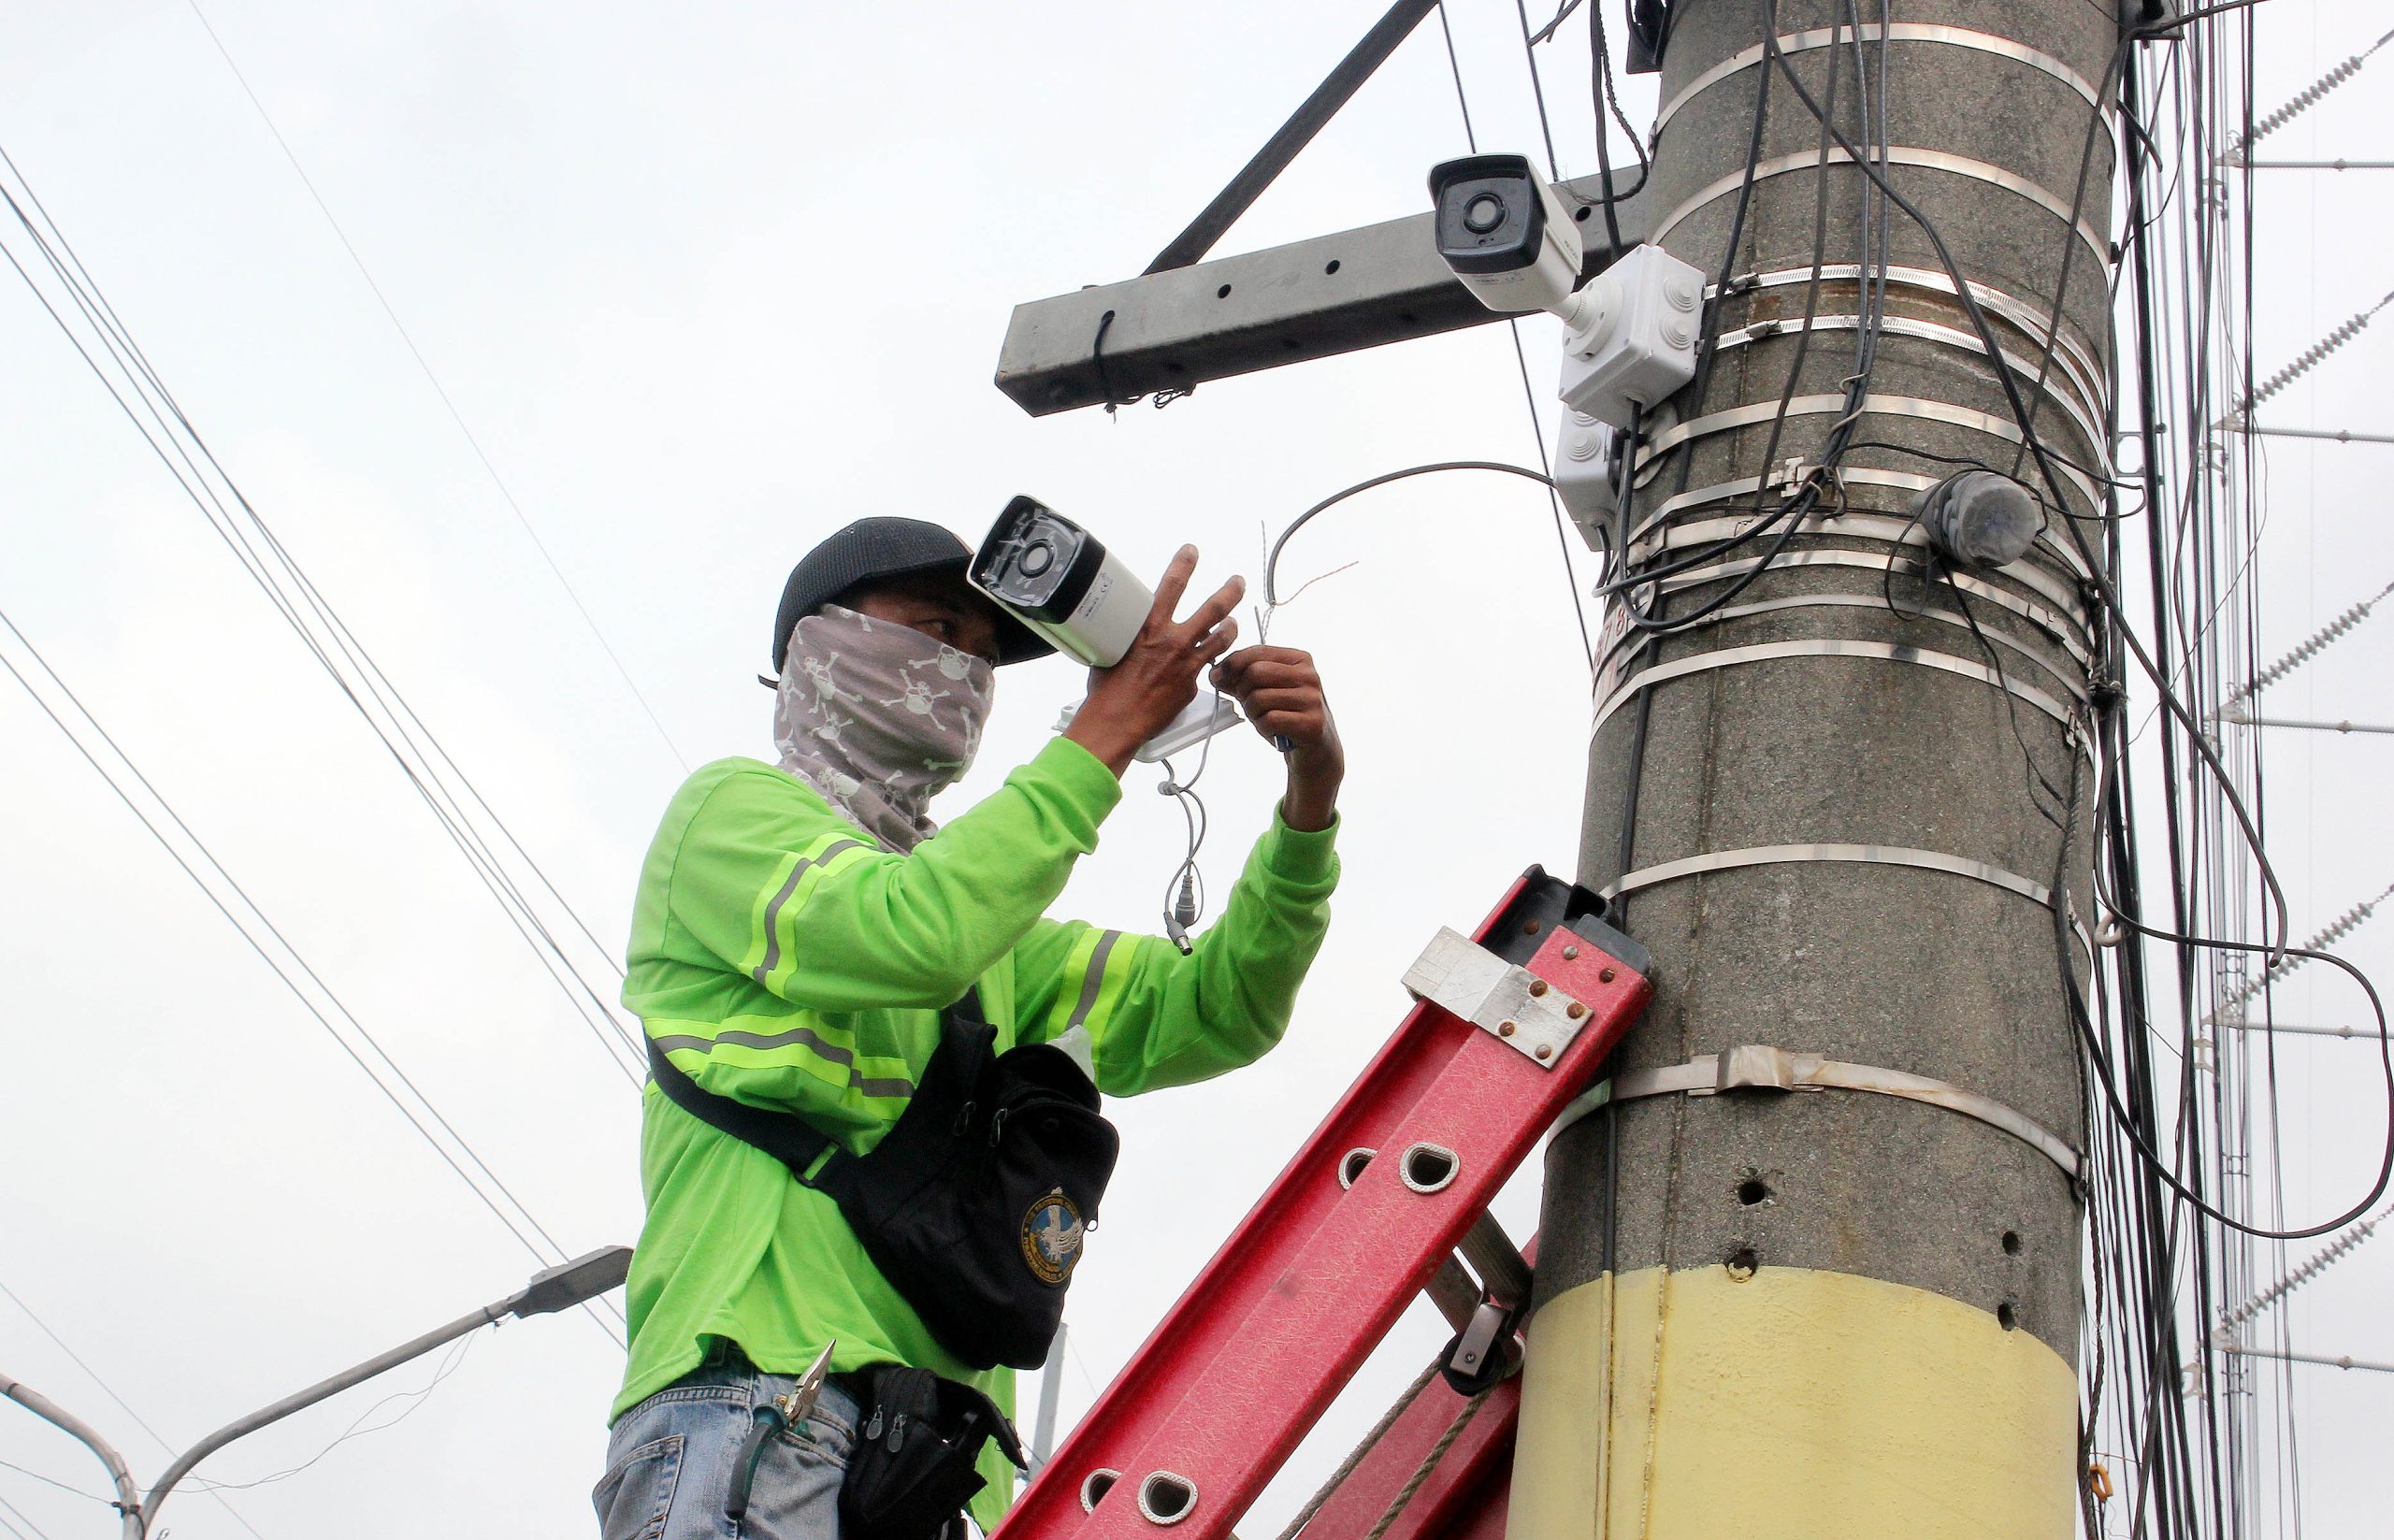 A worker installs closed-circuit television cameras on a concrete post